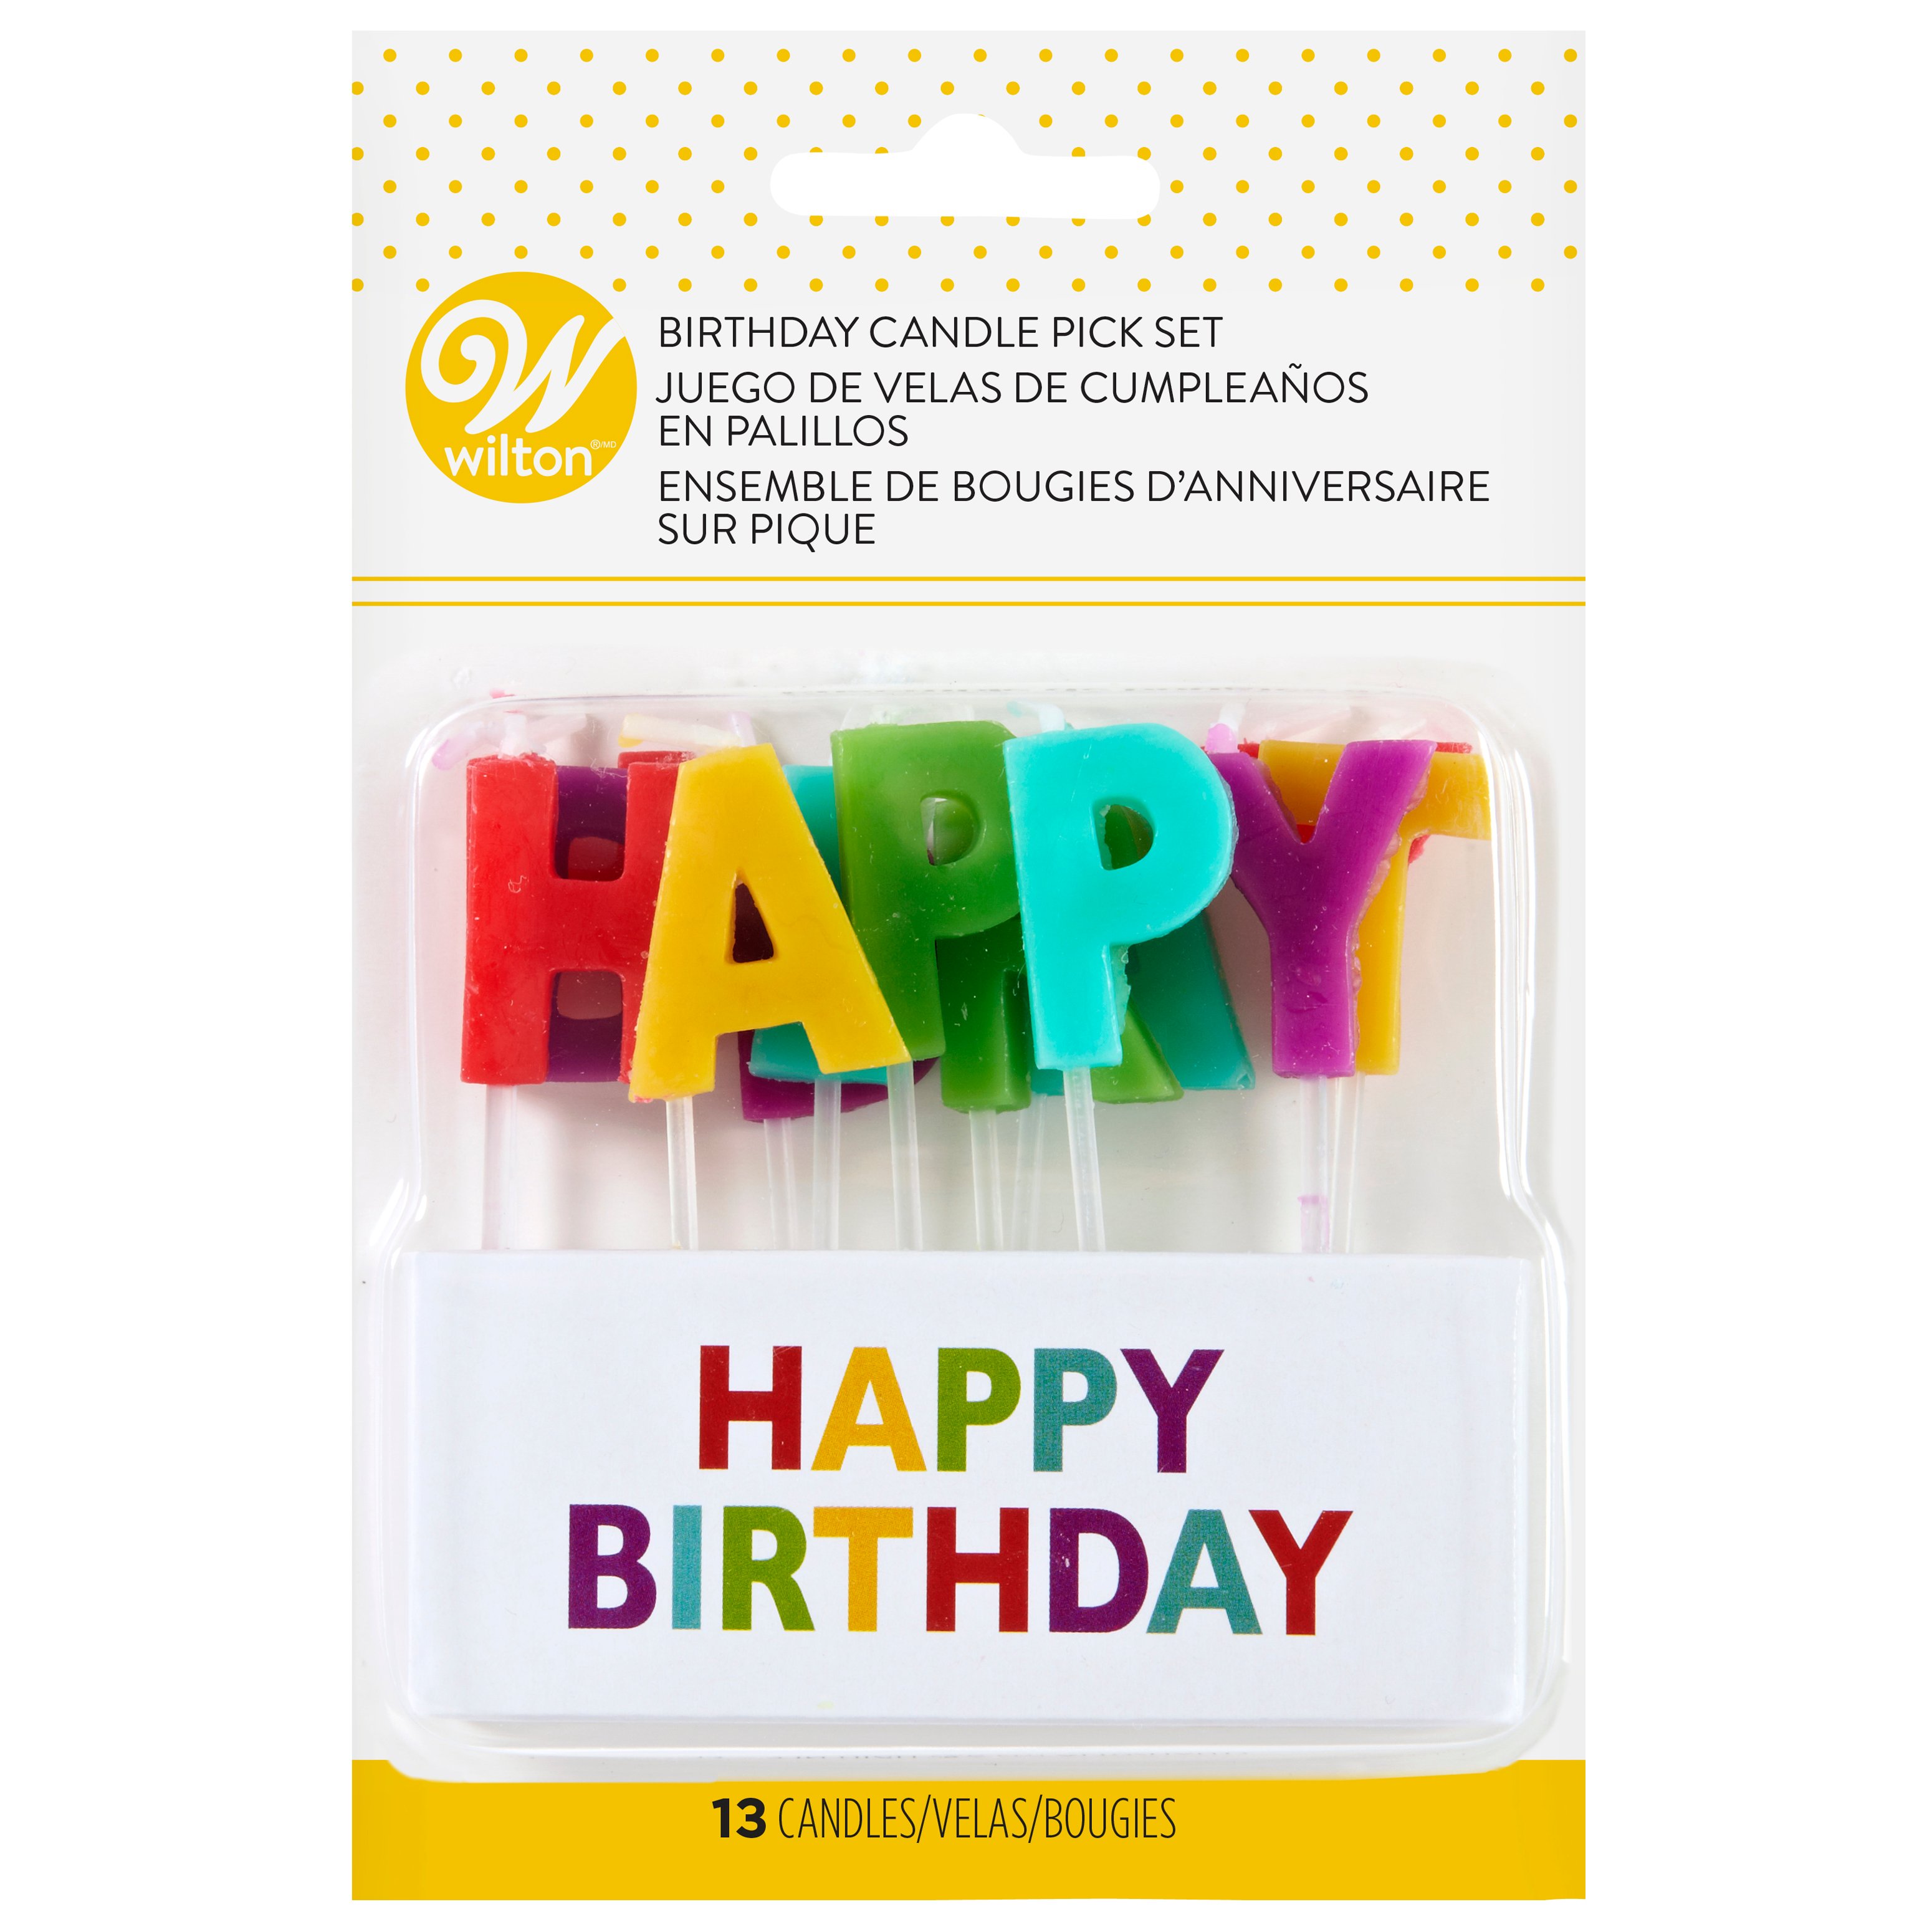 THE PIONEER WOMAN BIRTHDAY CANDLE ASSORTMENT NEW FLORAL PICK CANDLES